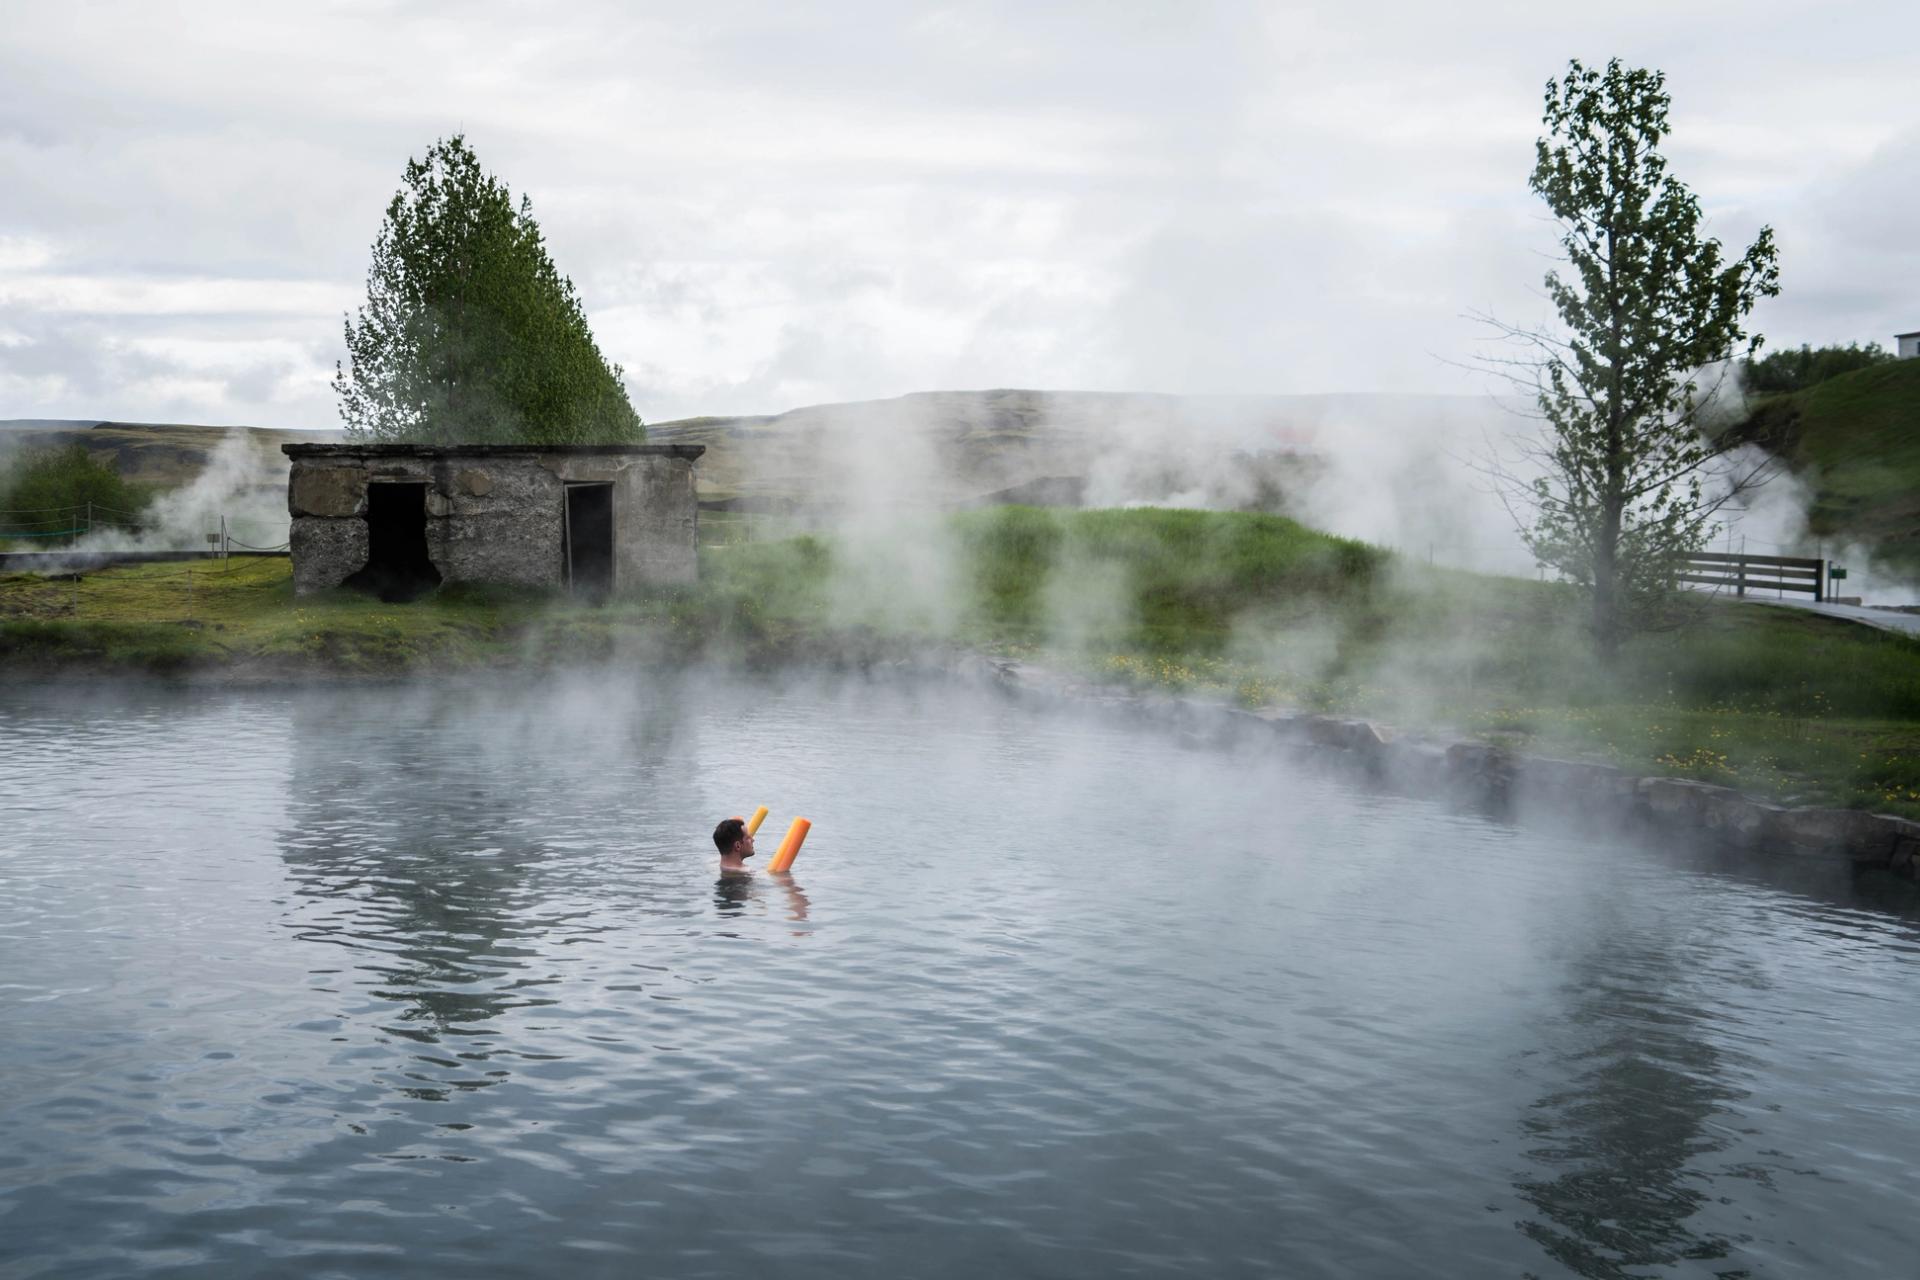 Hot springs in iceland: Secret lagoon, a hot spring  swimming pools located near the golden circle in Iceland